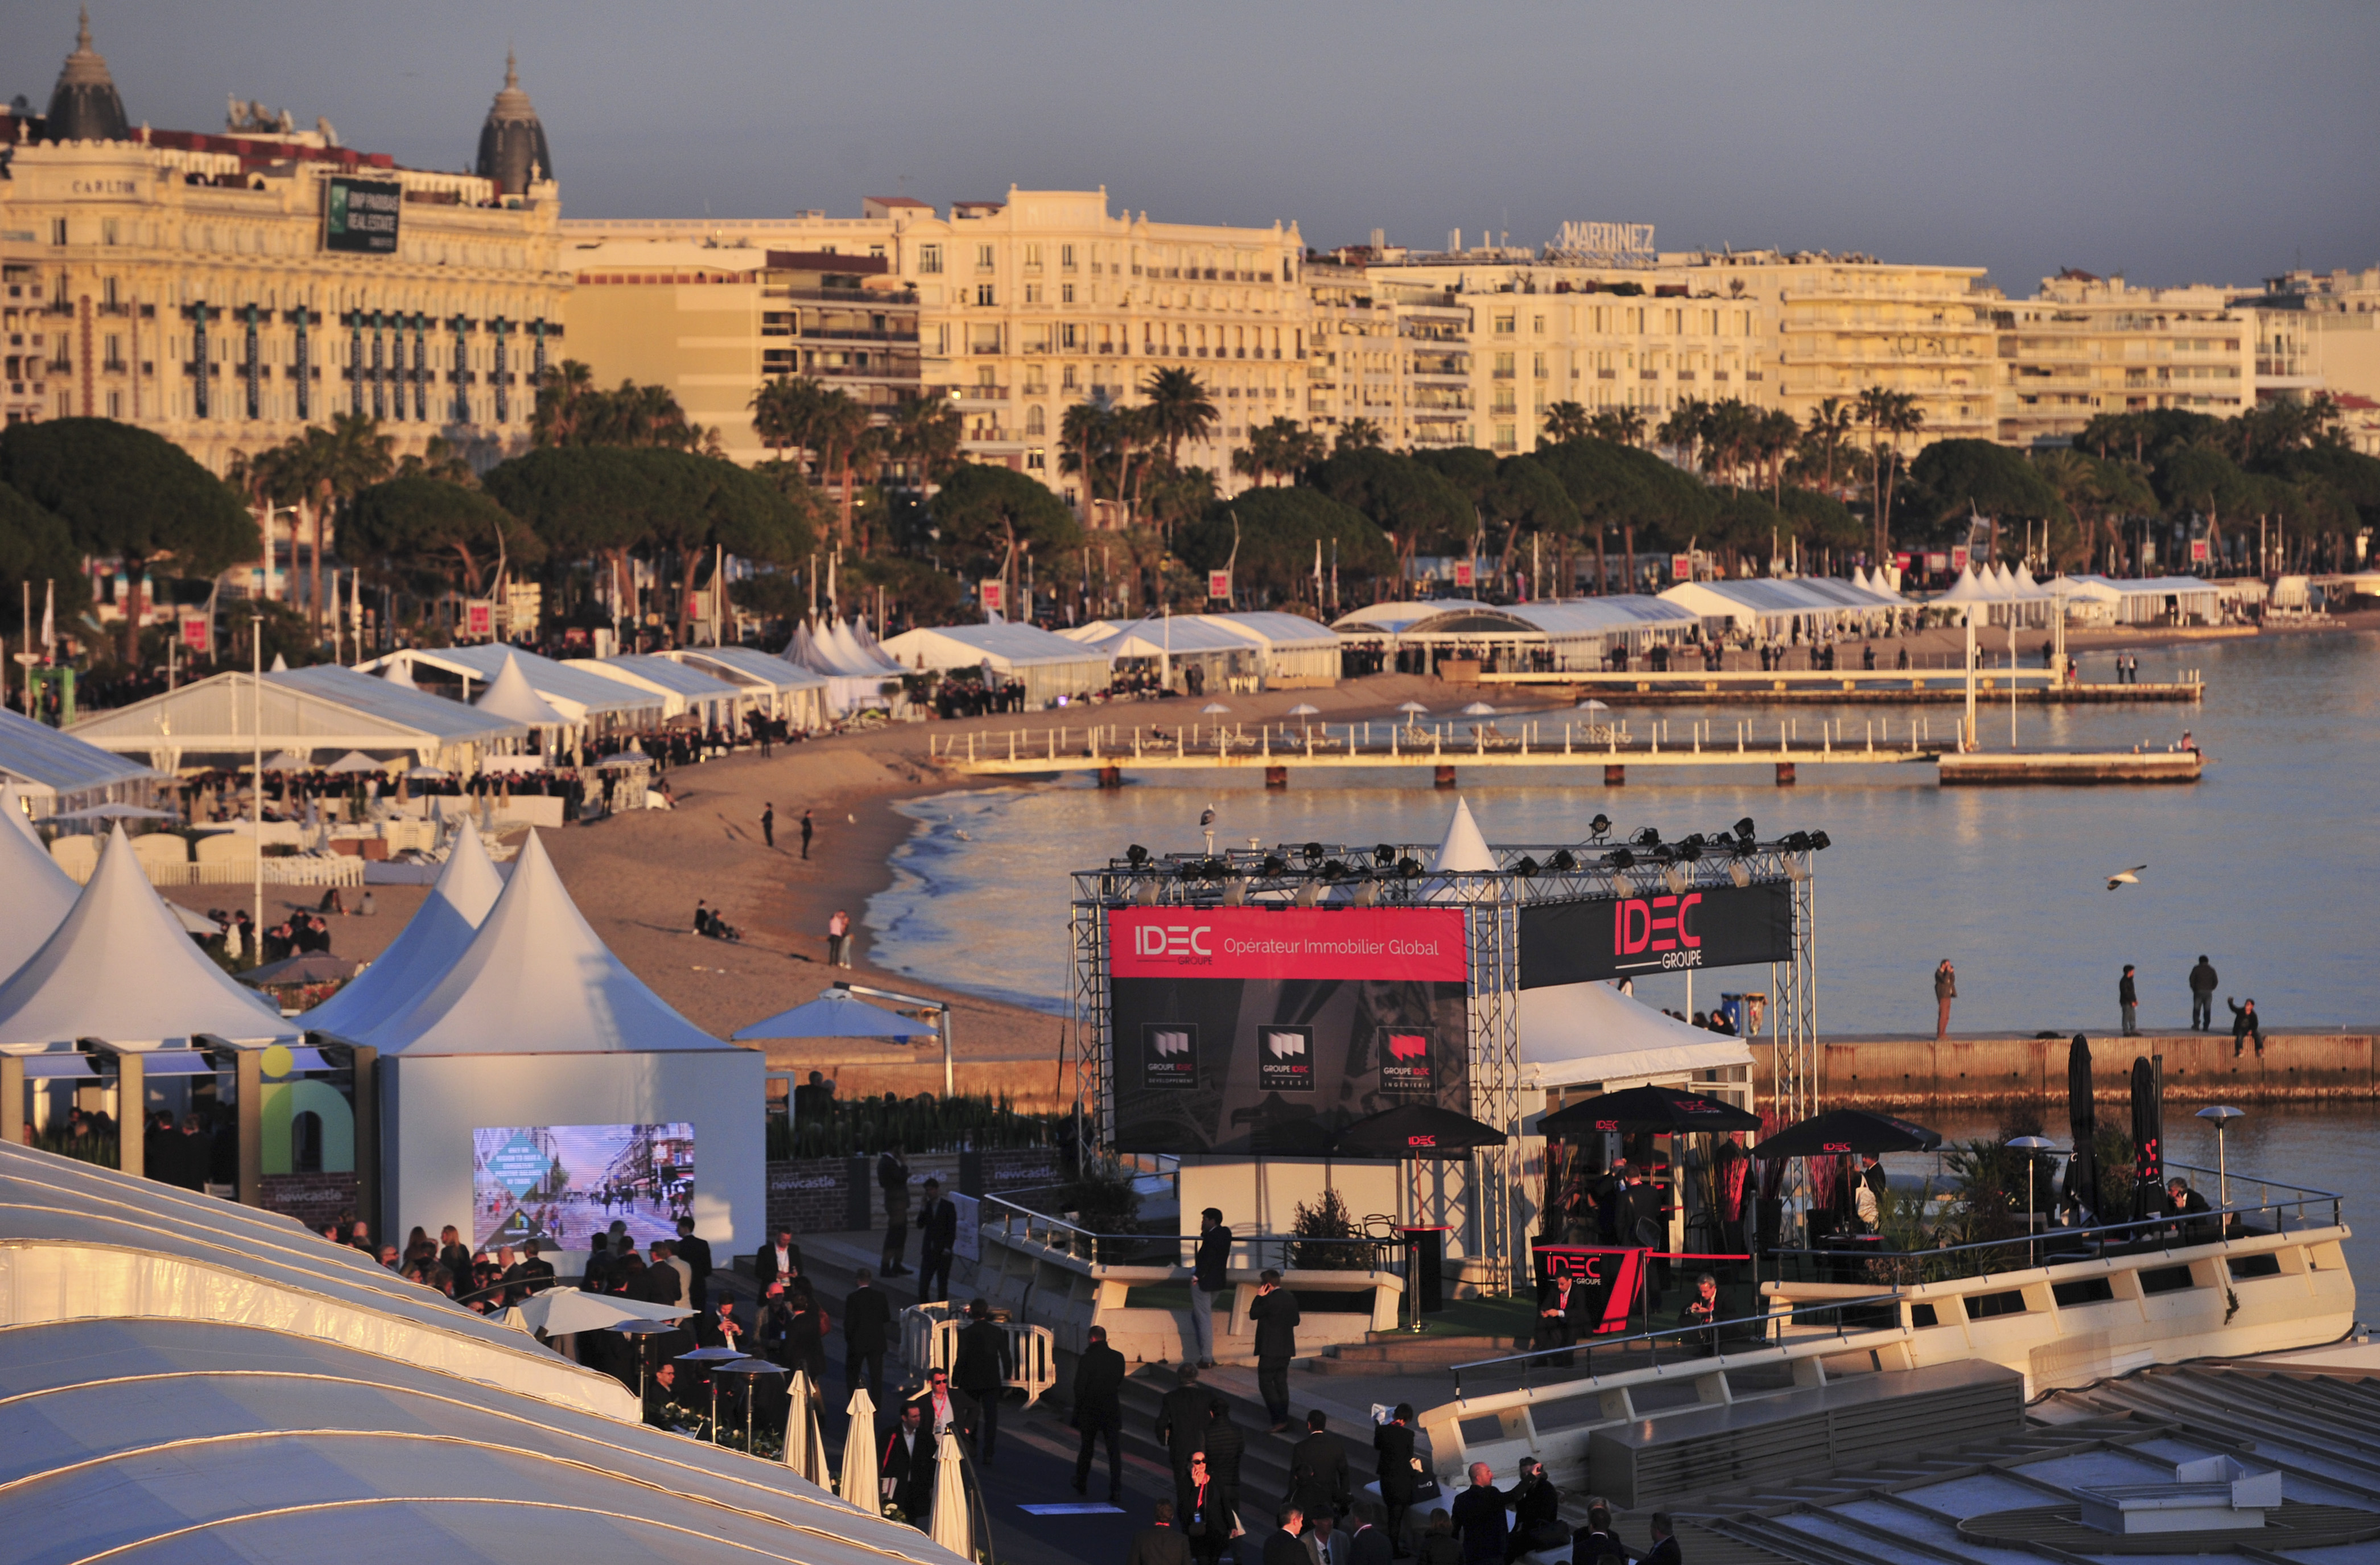 Our summary on the Mipim experience Cannes, 13-16 March 2018